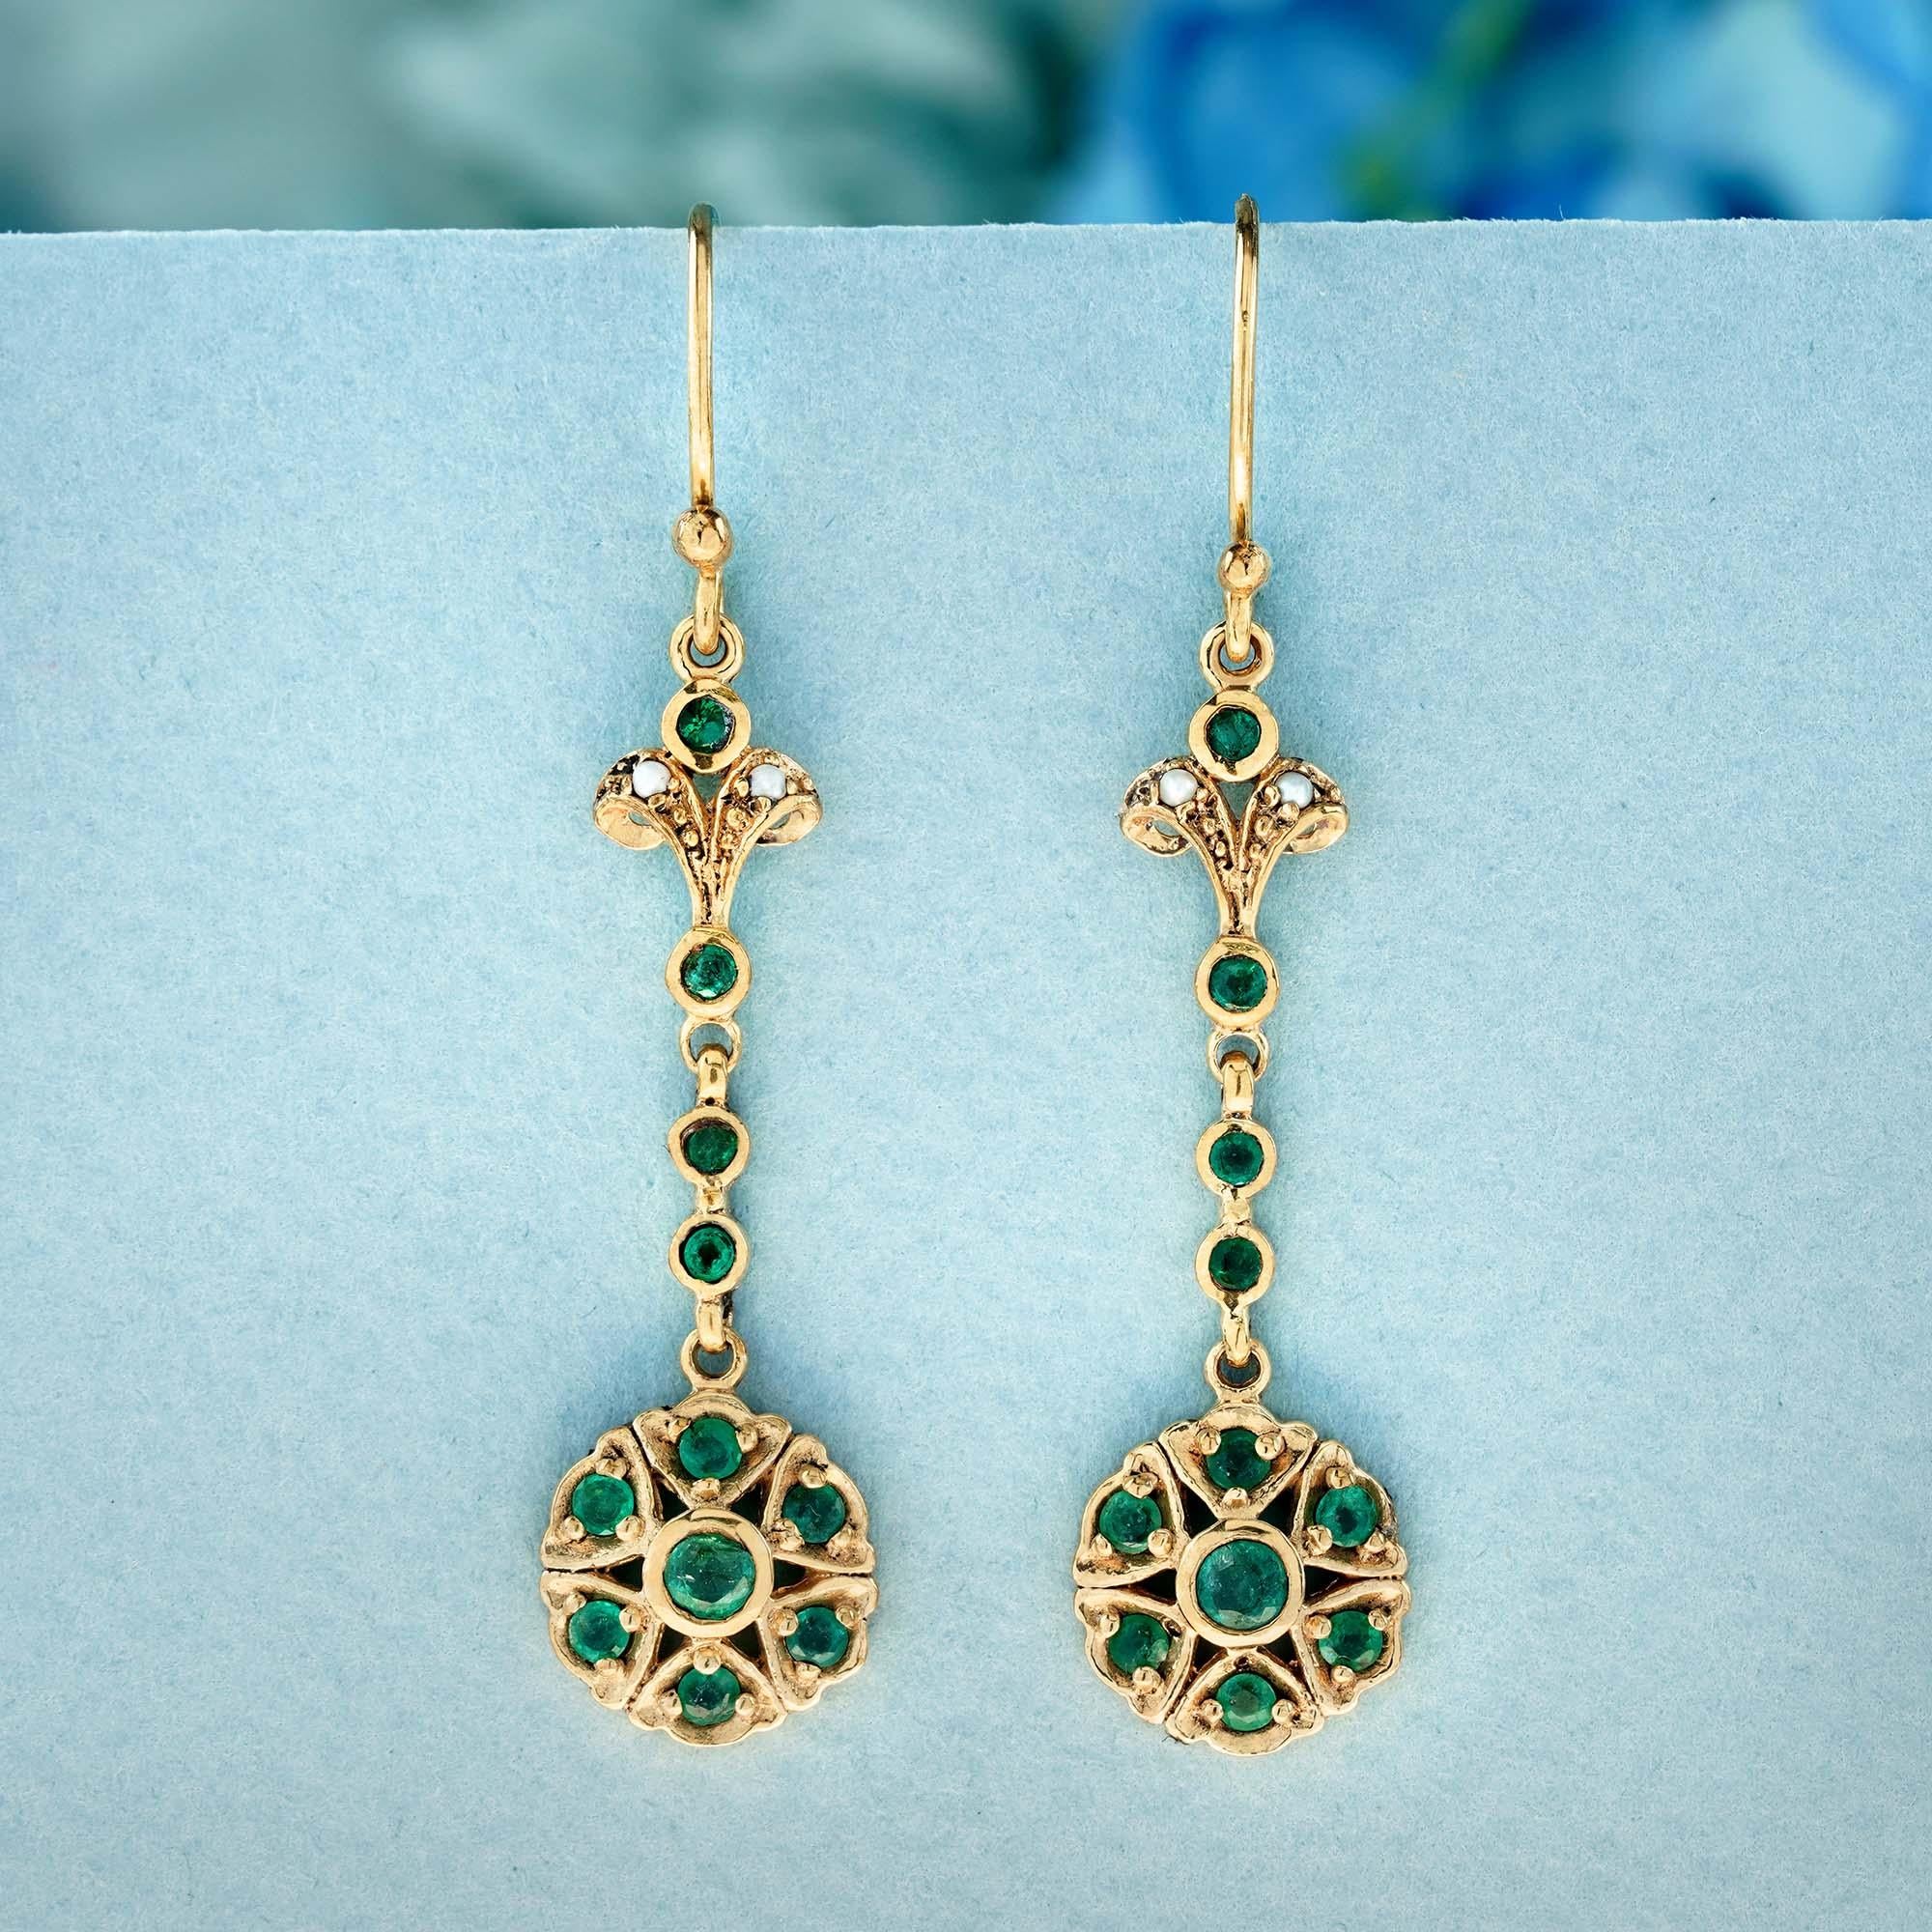 These dangling earrings draw inspiration from vintage aesthetics. They showcase a delicate chain adorned with round green emeralds, gracefully cascading from a bezel-set round emerald flower in a yellow gold frame. The design concludes with an